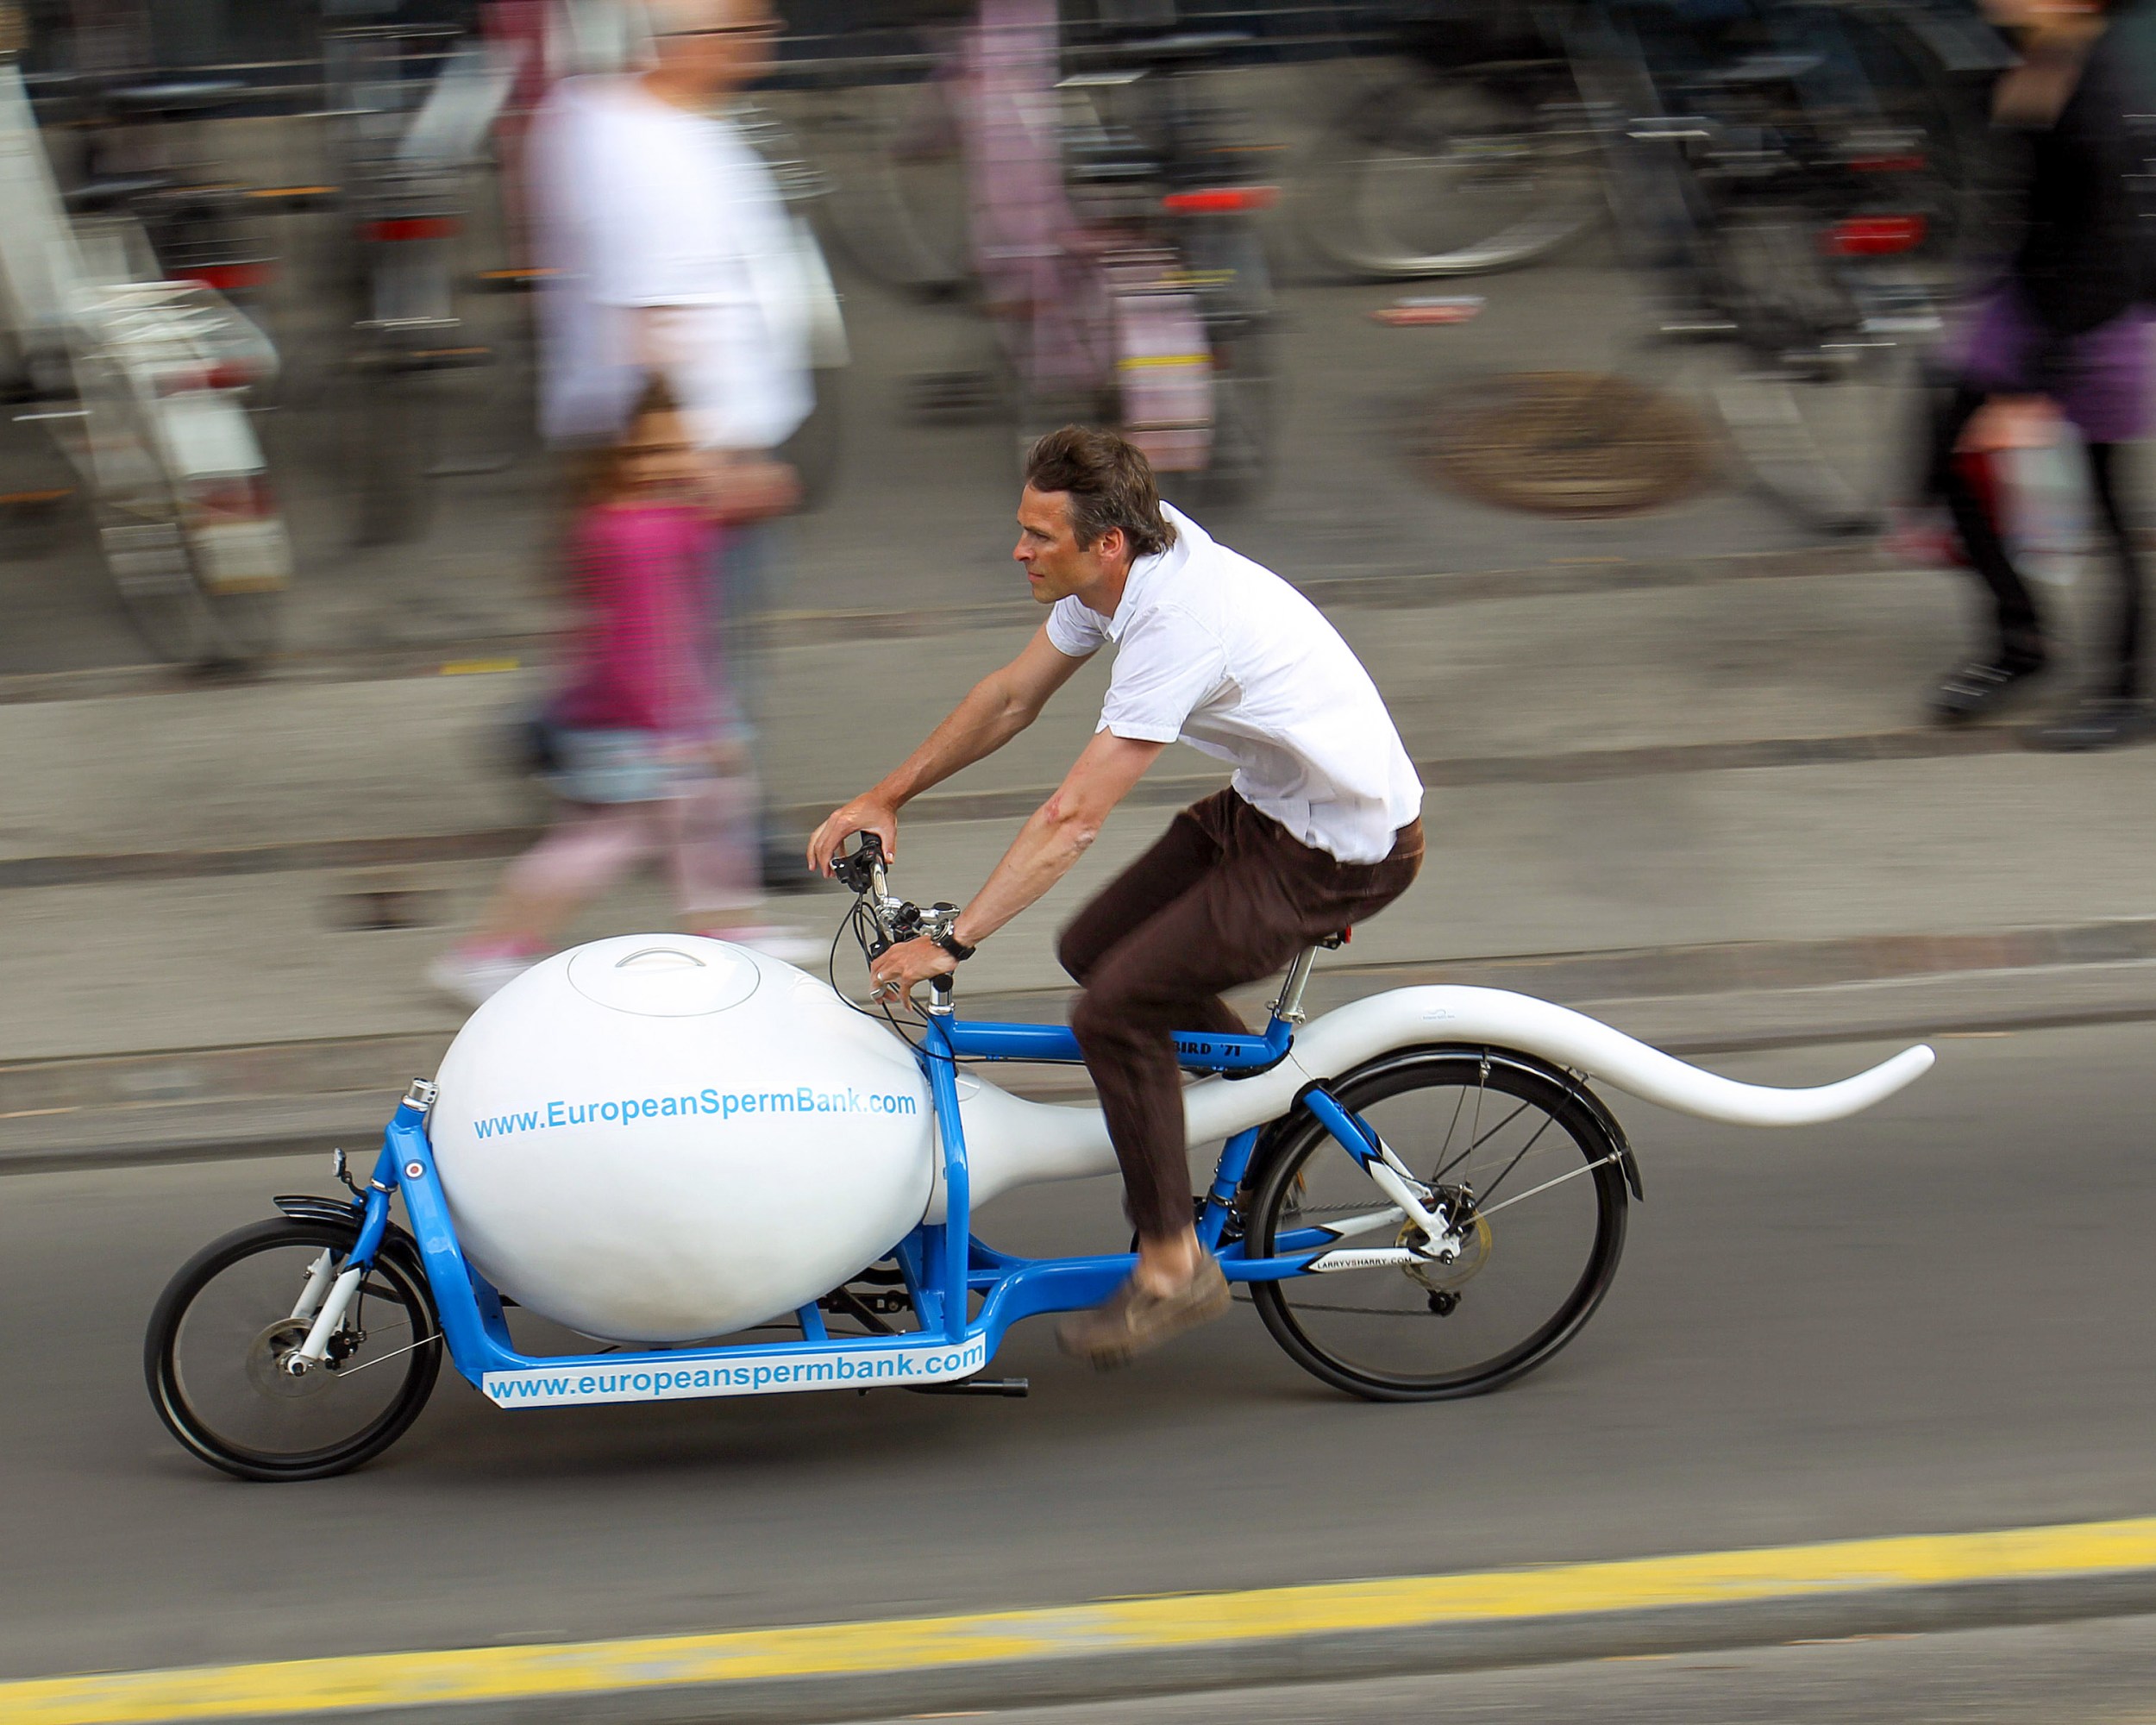 courier on a sperm-shaped bike speeding down the road